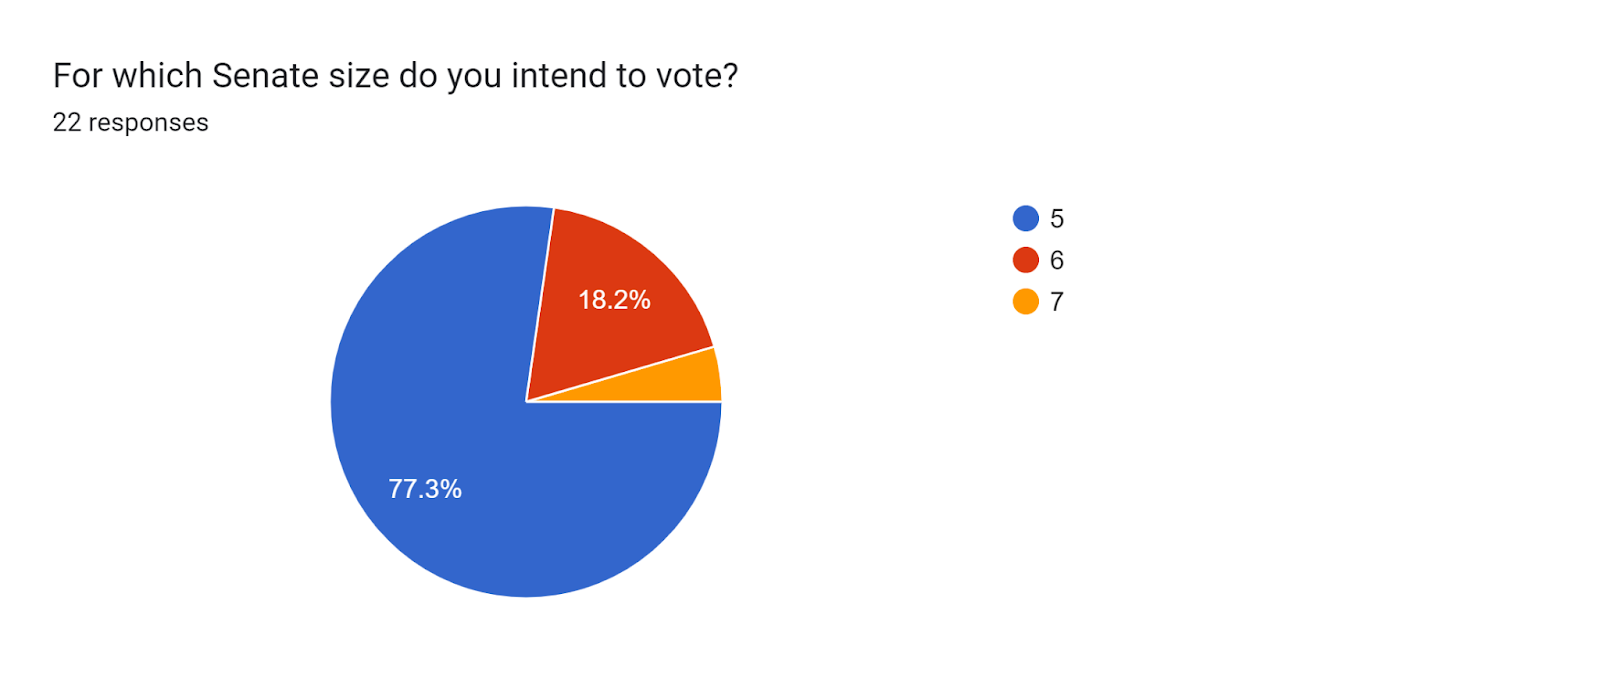 Forms response chart. Question title: For which Senate size do you intend to vote?. Number of responses: 22 responses.